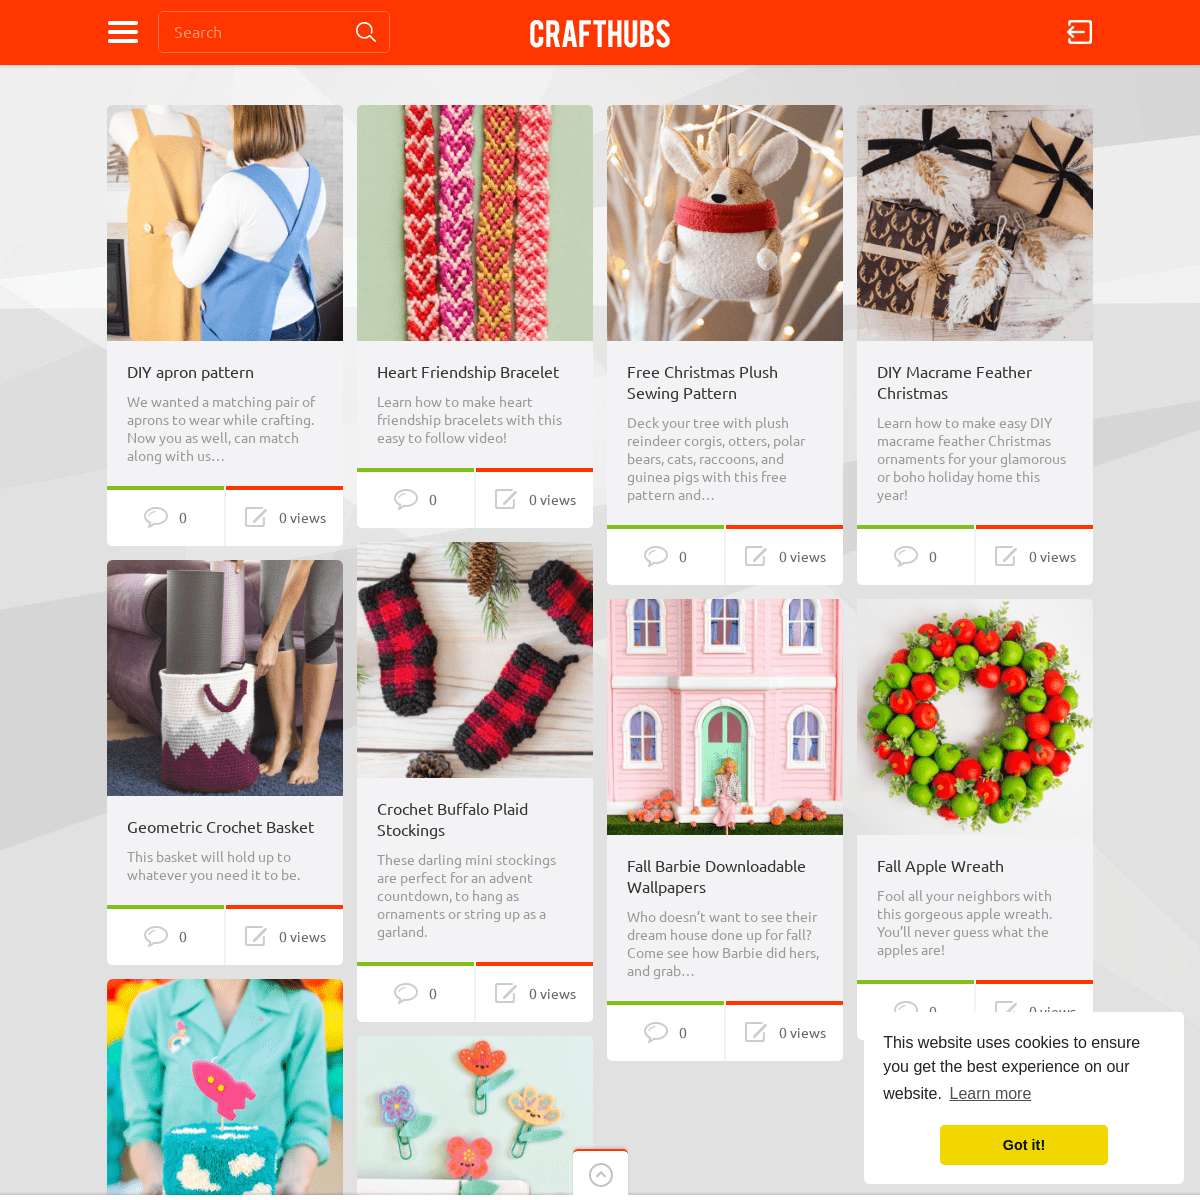 Crafthubs — Creative ideas for your DIY projects